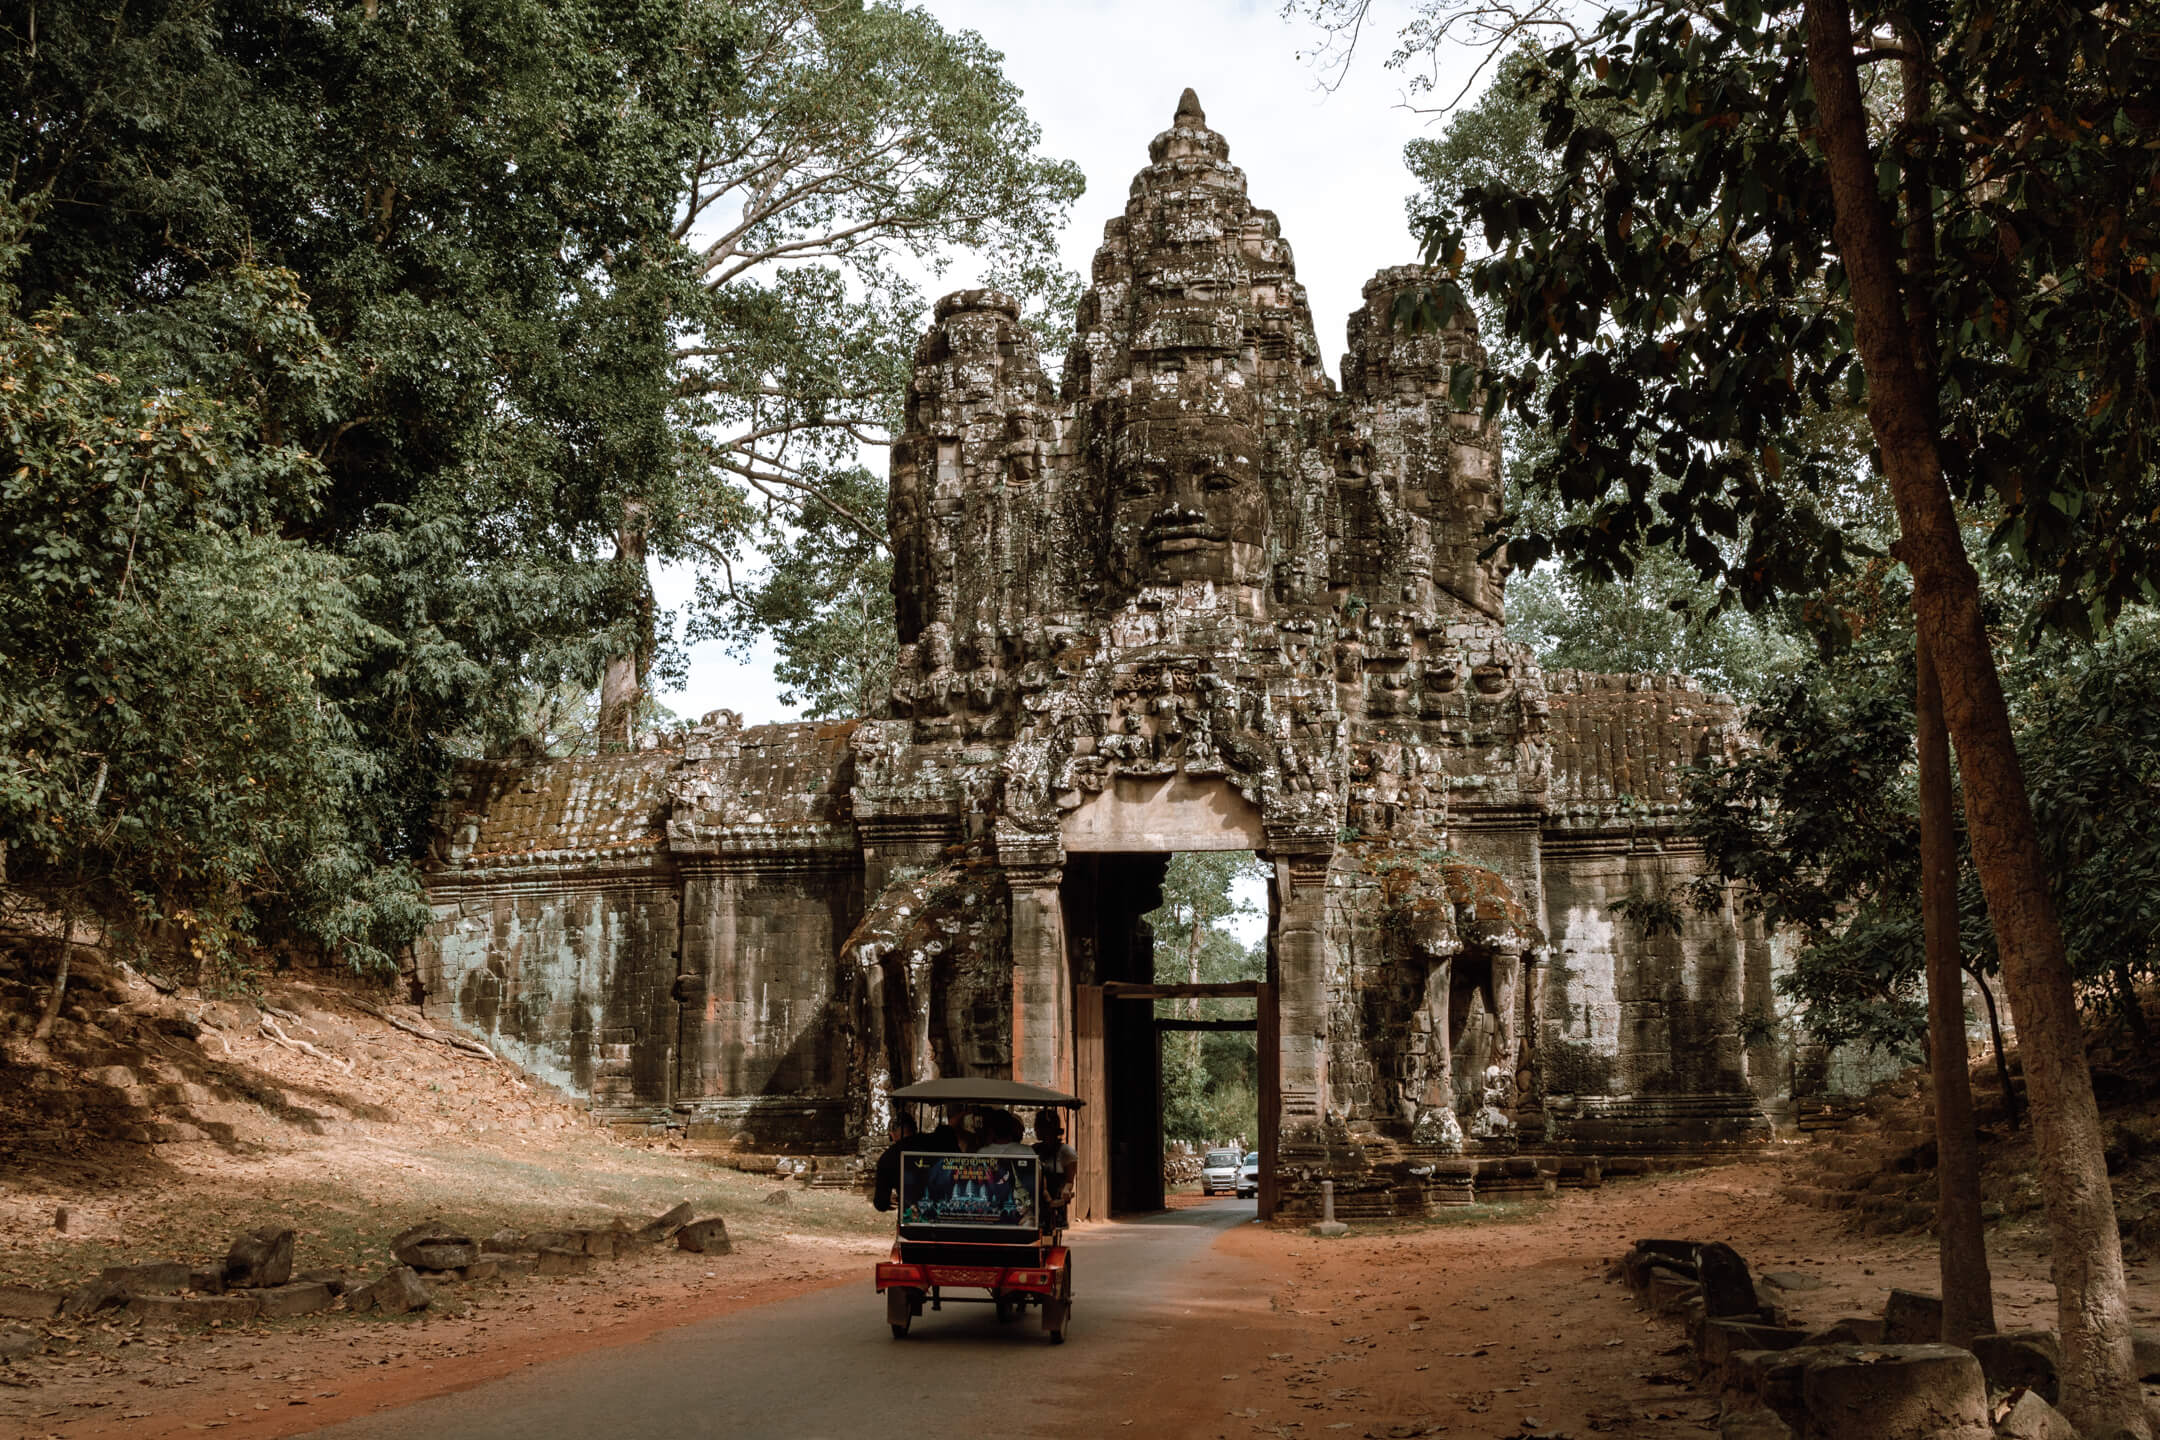 The Ultimate Guide To Angkor Wat – Cambodia’s Top Tourist Attraction